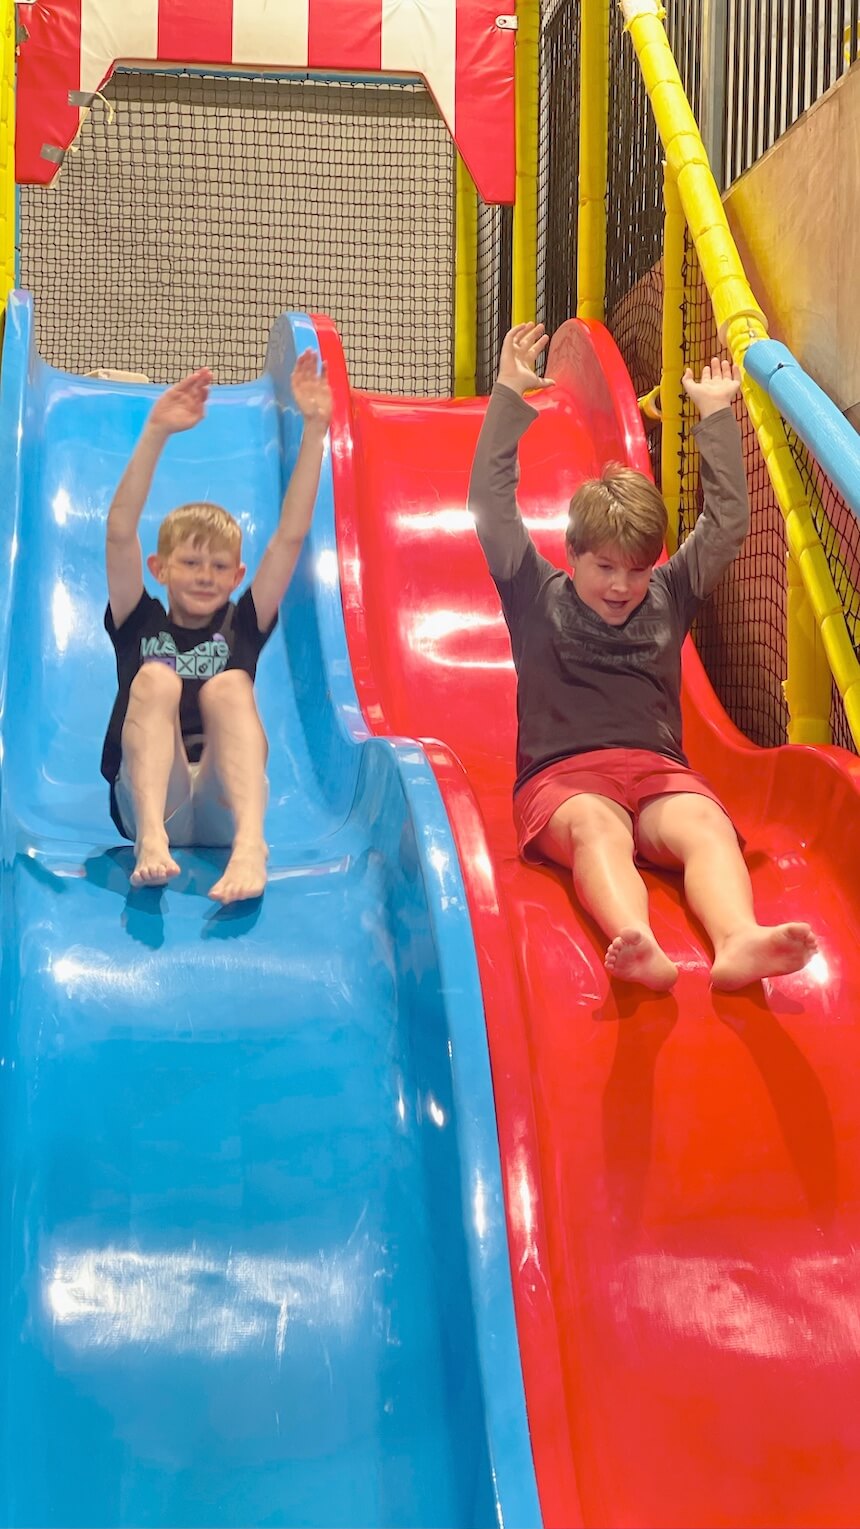 Revolution Sports Park in Brisbane North features slides, trampolines, airbags, Ninja ramps, rock climbing walls and a dedicated toddlers area.